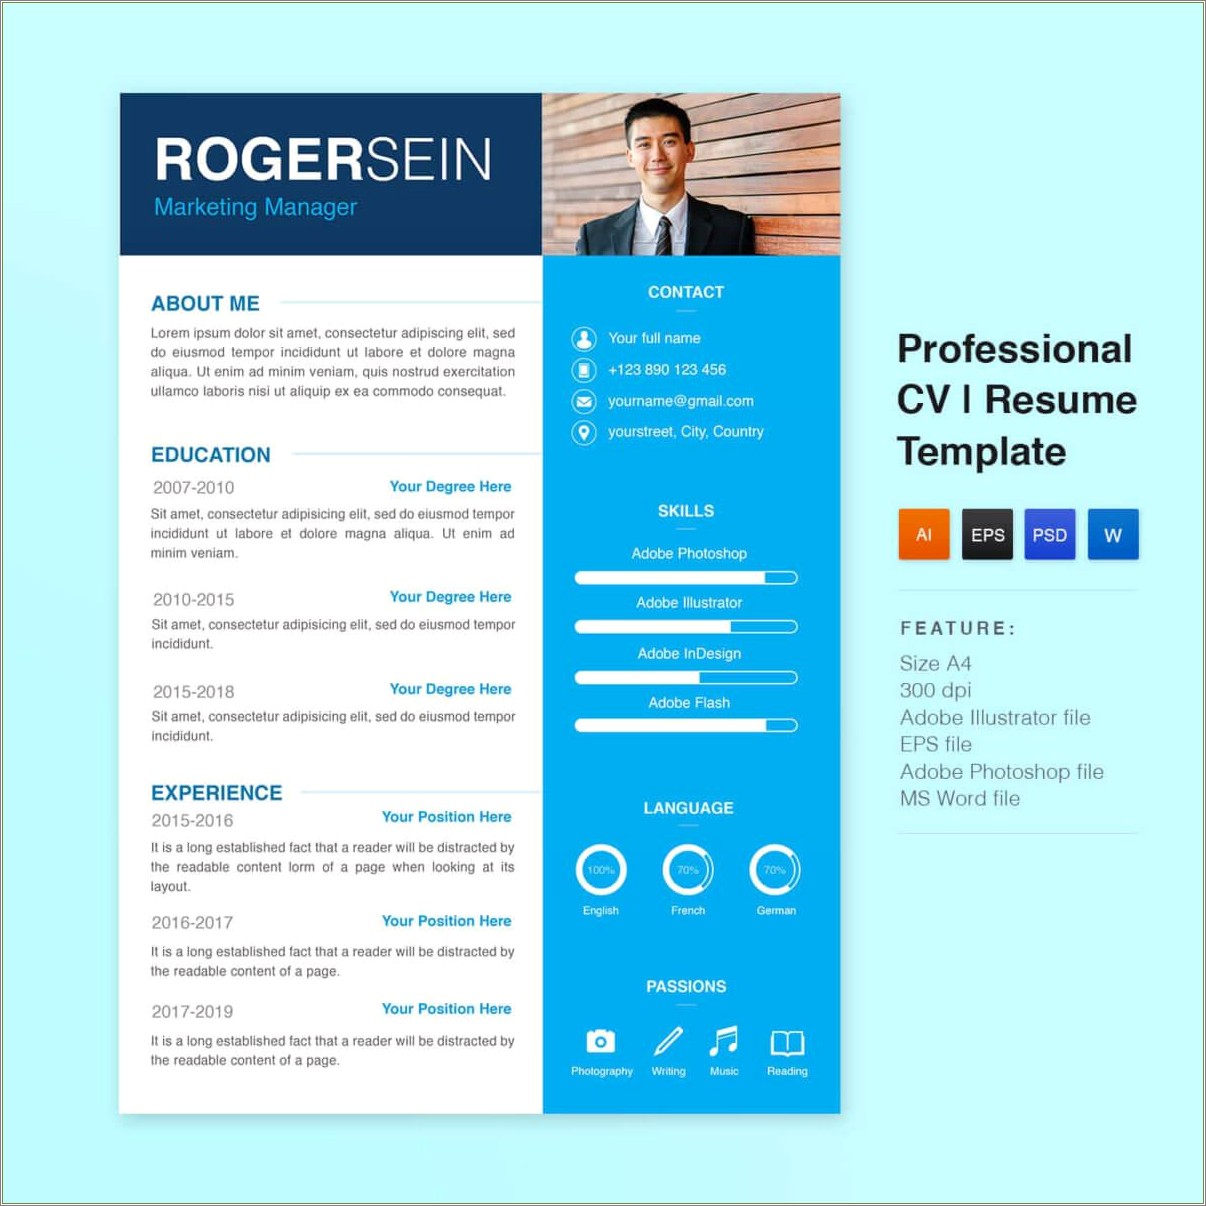 Free Resume Template Download Without Creating An Account